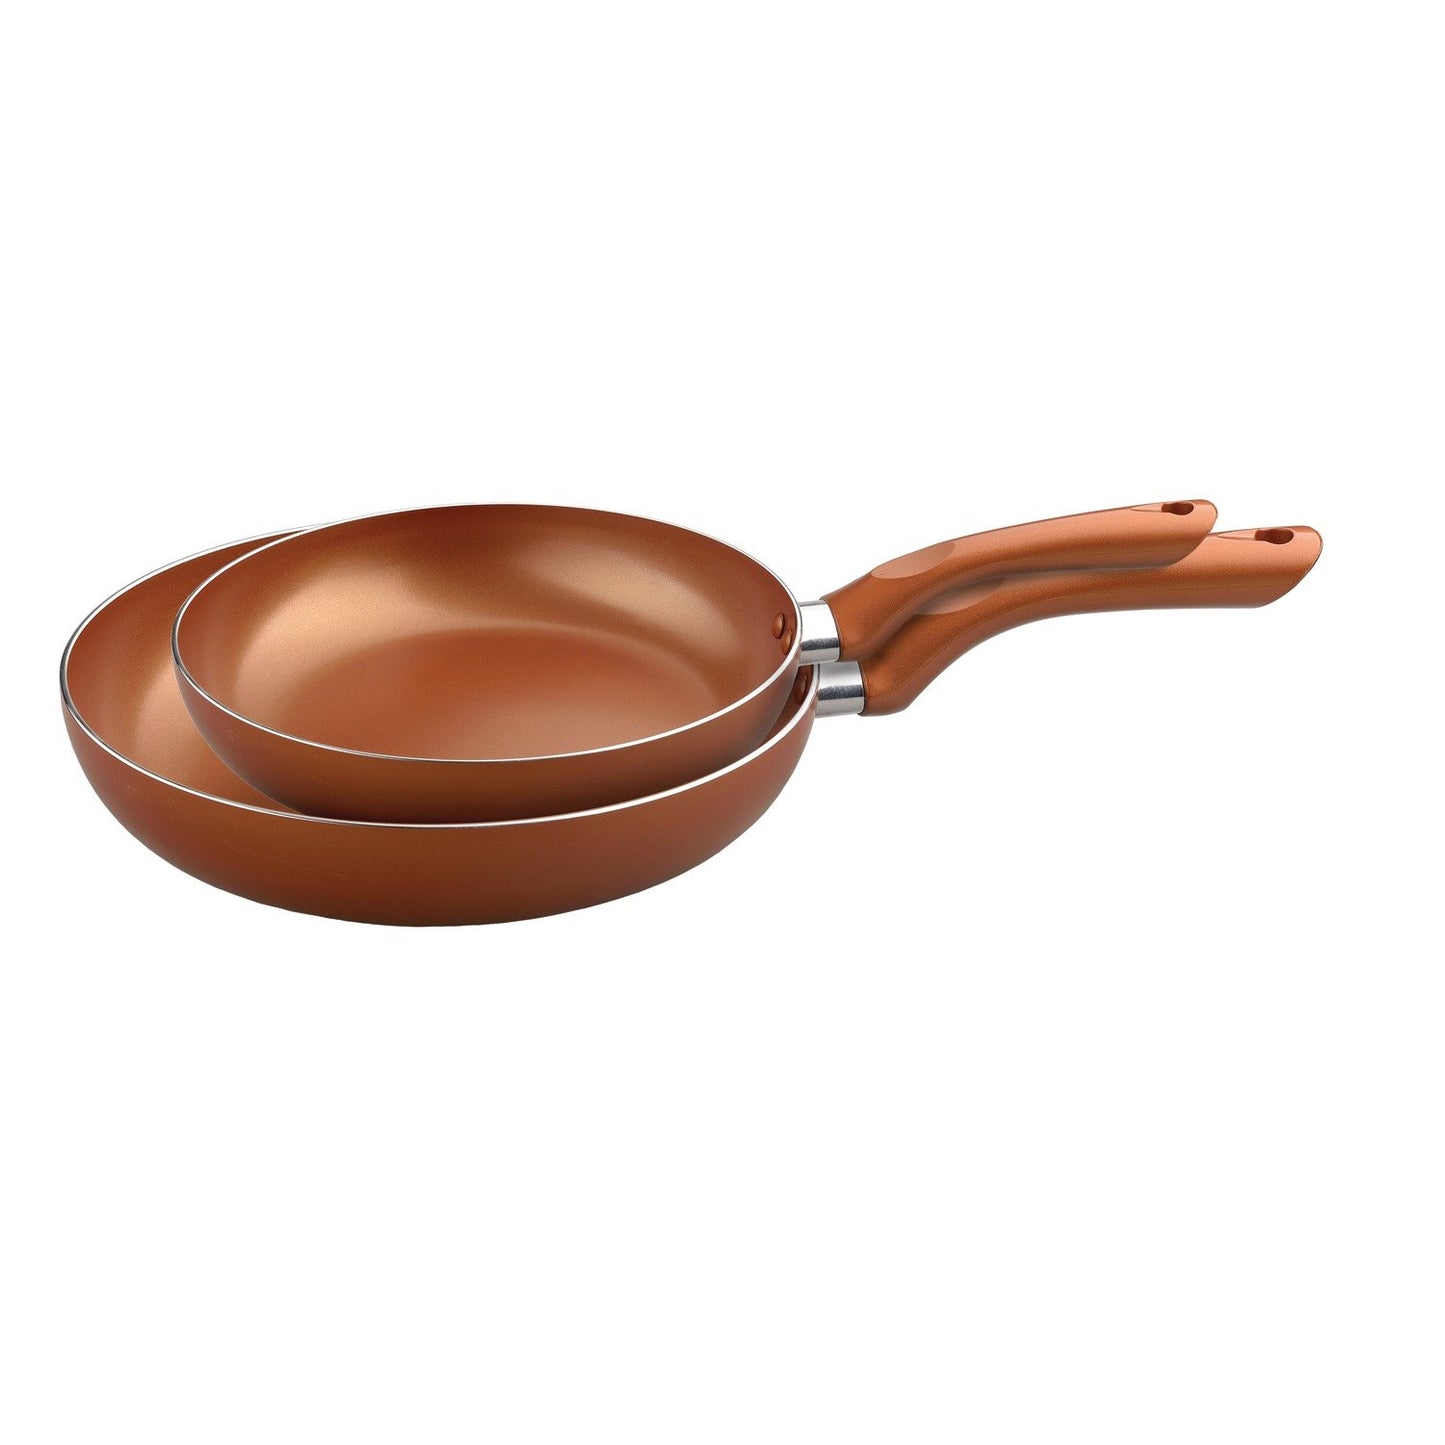 BRENTWOOD BPS-107C 7pc Non-Stick Copper Cookware Set